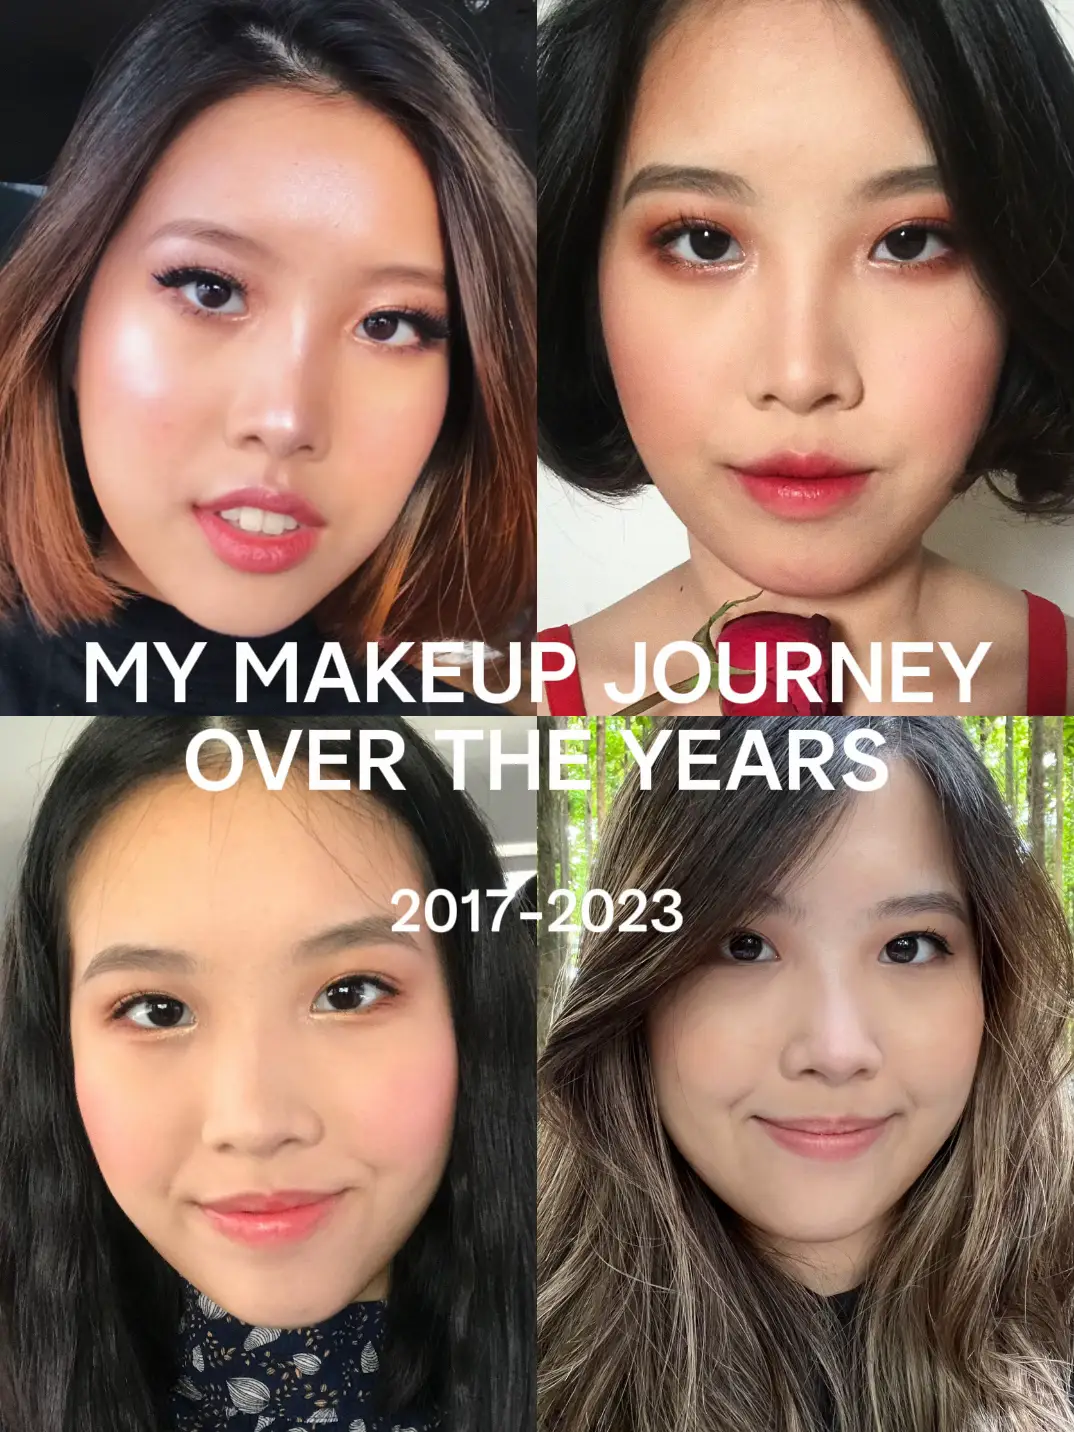 Makeup Looks Based On Trends